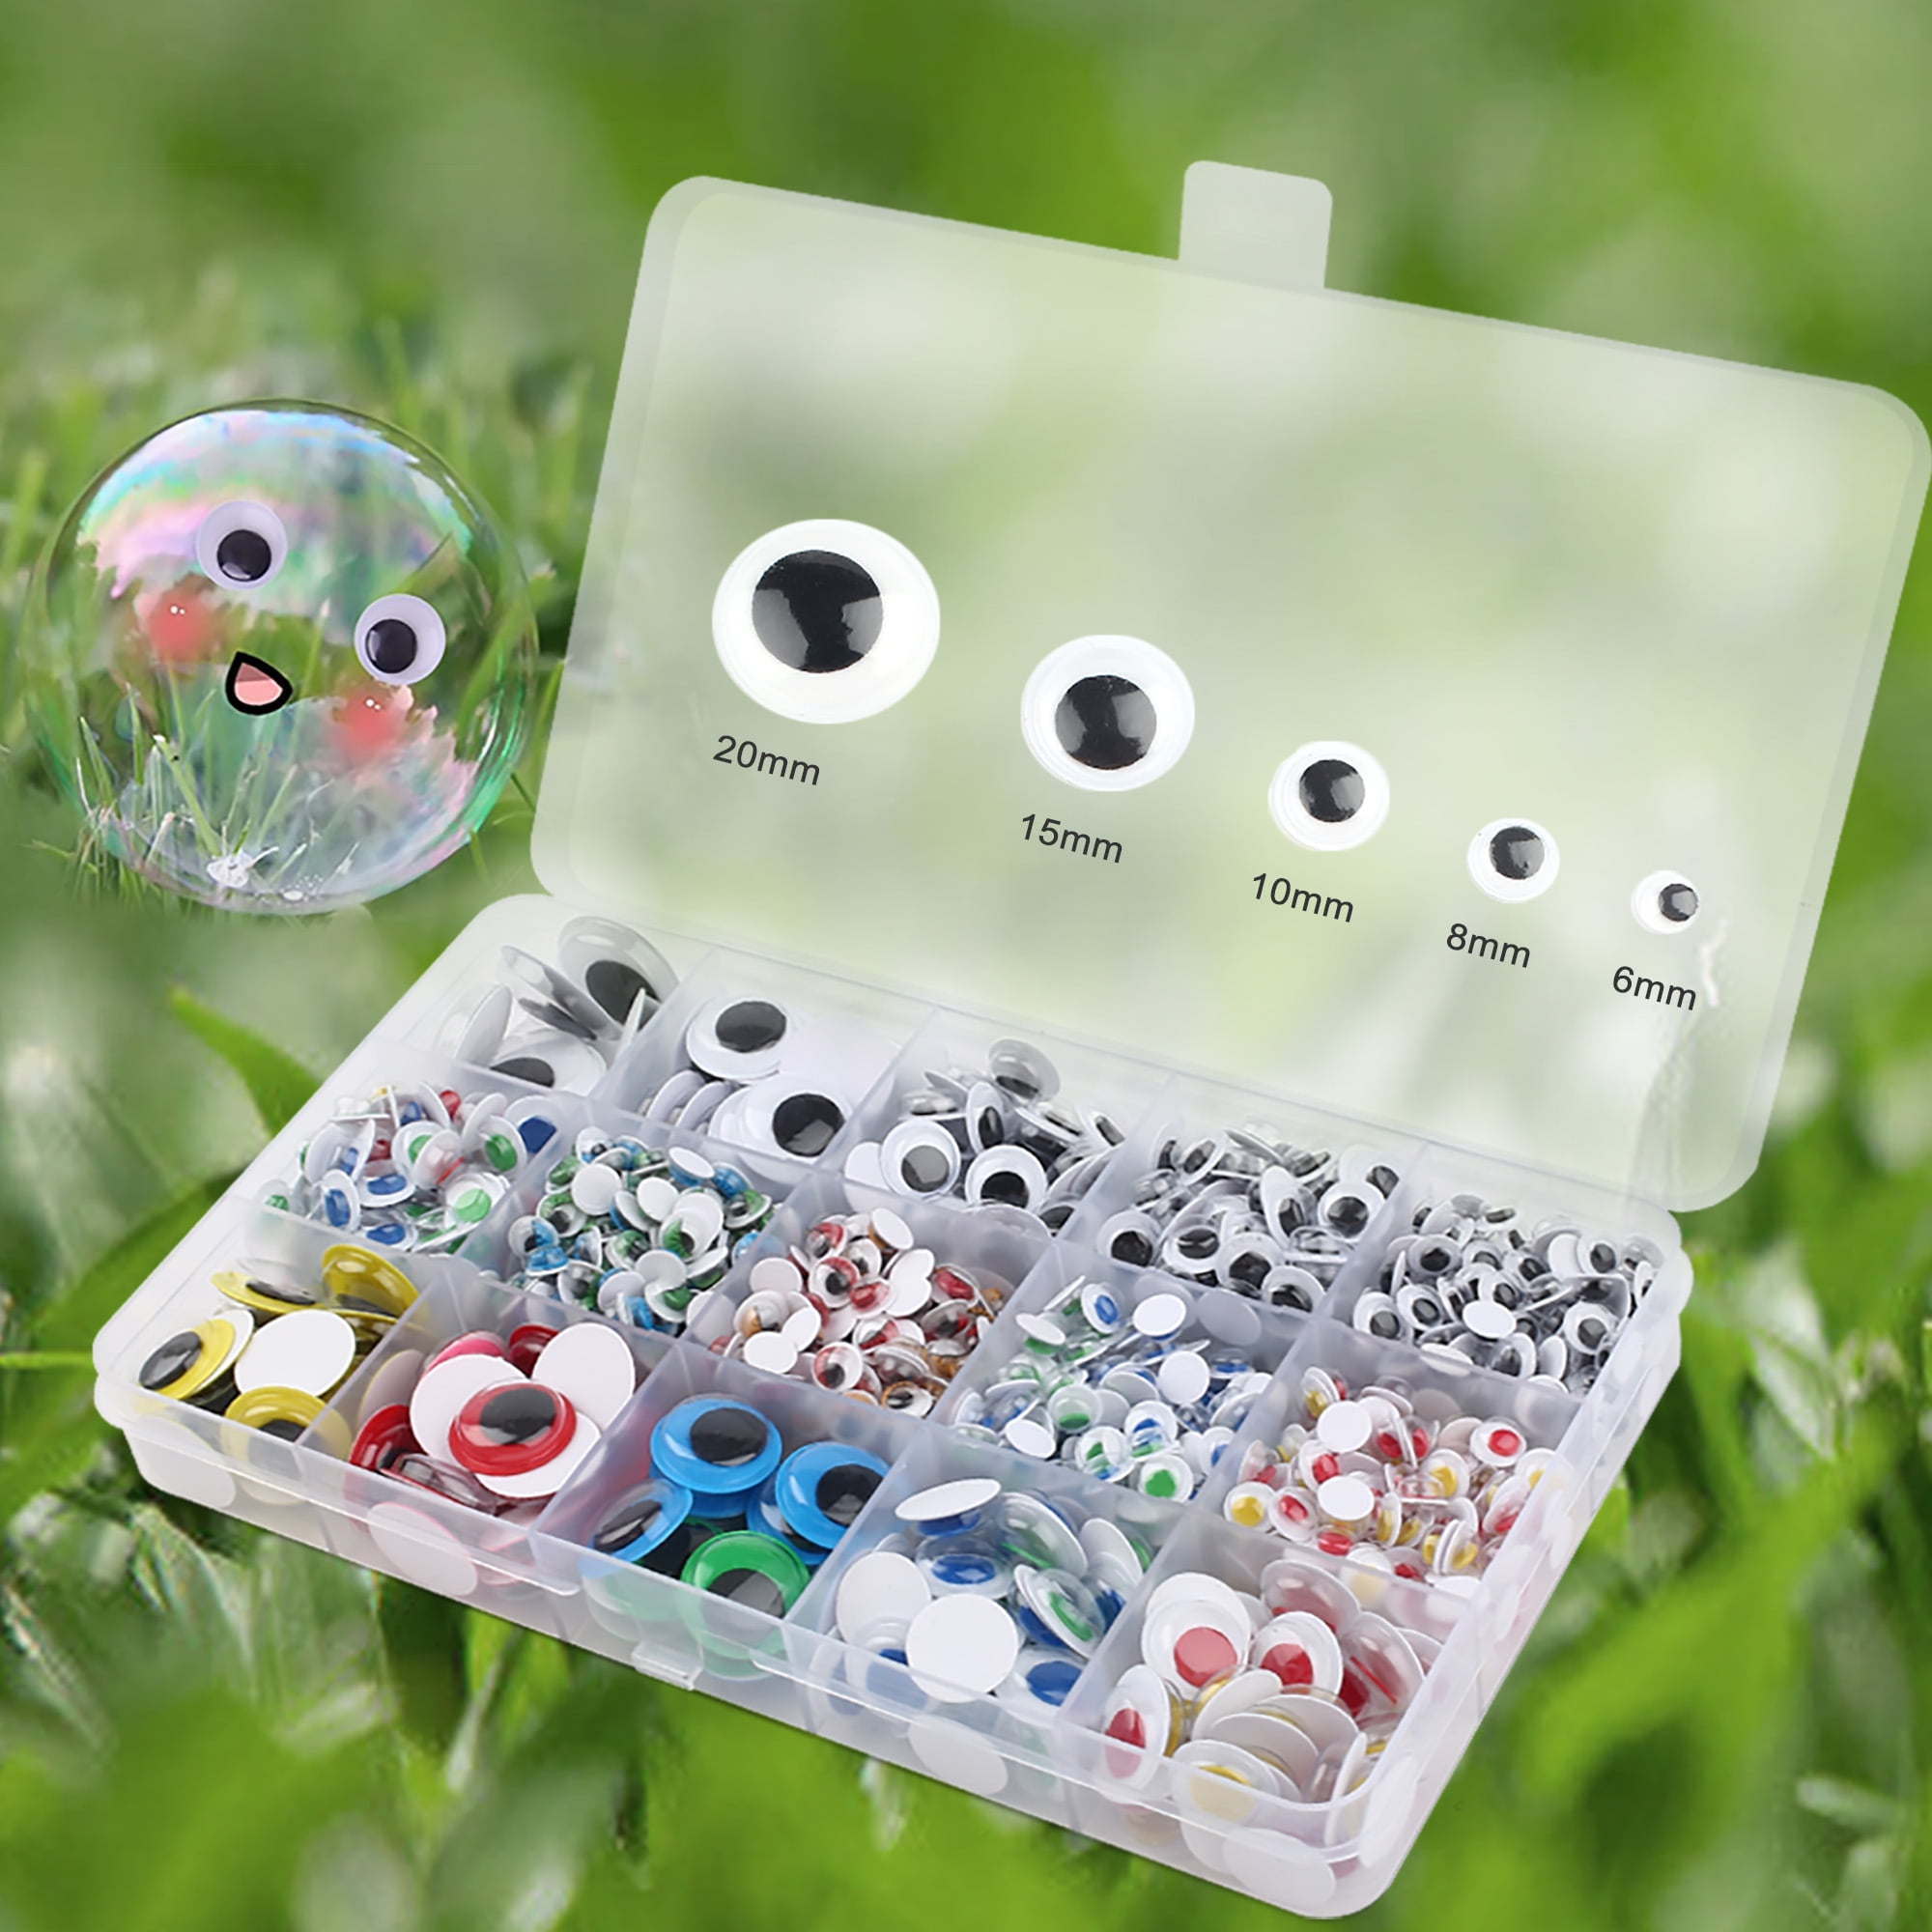 LotFancy Wiggle Googly Eyes for Crafts, 1100PCS Self-Adhesive Multi Colored  Assorted Sizes(6mm, 8mm, 10mm, 12mm, 15mm, 20mm), Google Eyes Stickers for  DIY, Toy Accessories, Art Crafts, Decoration